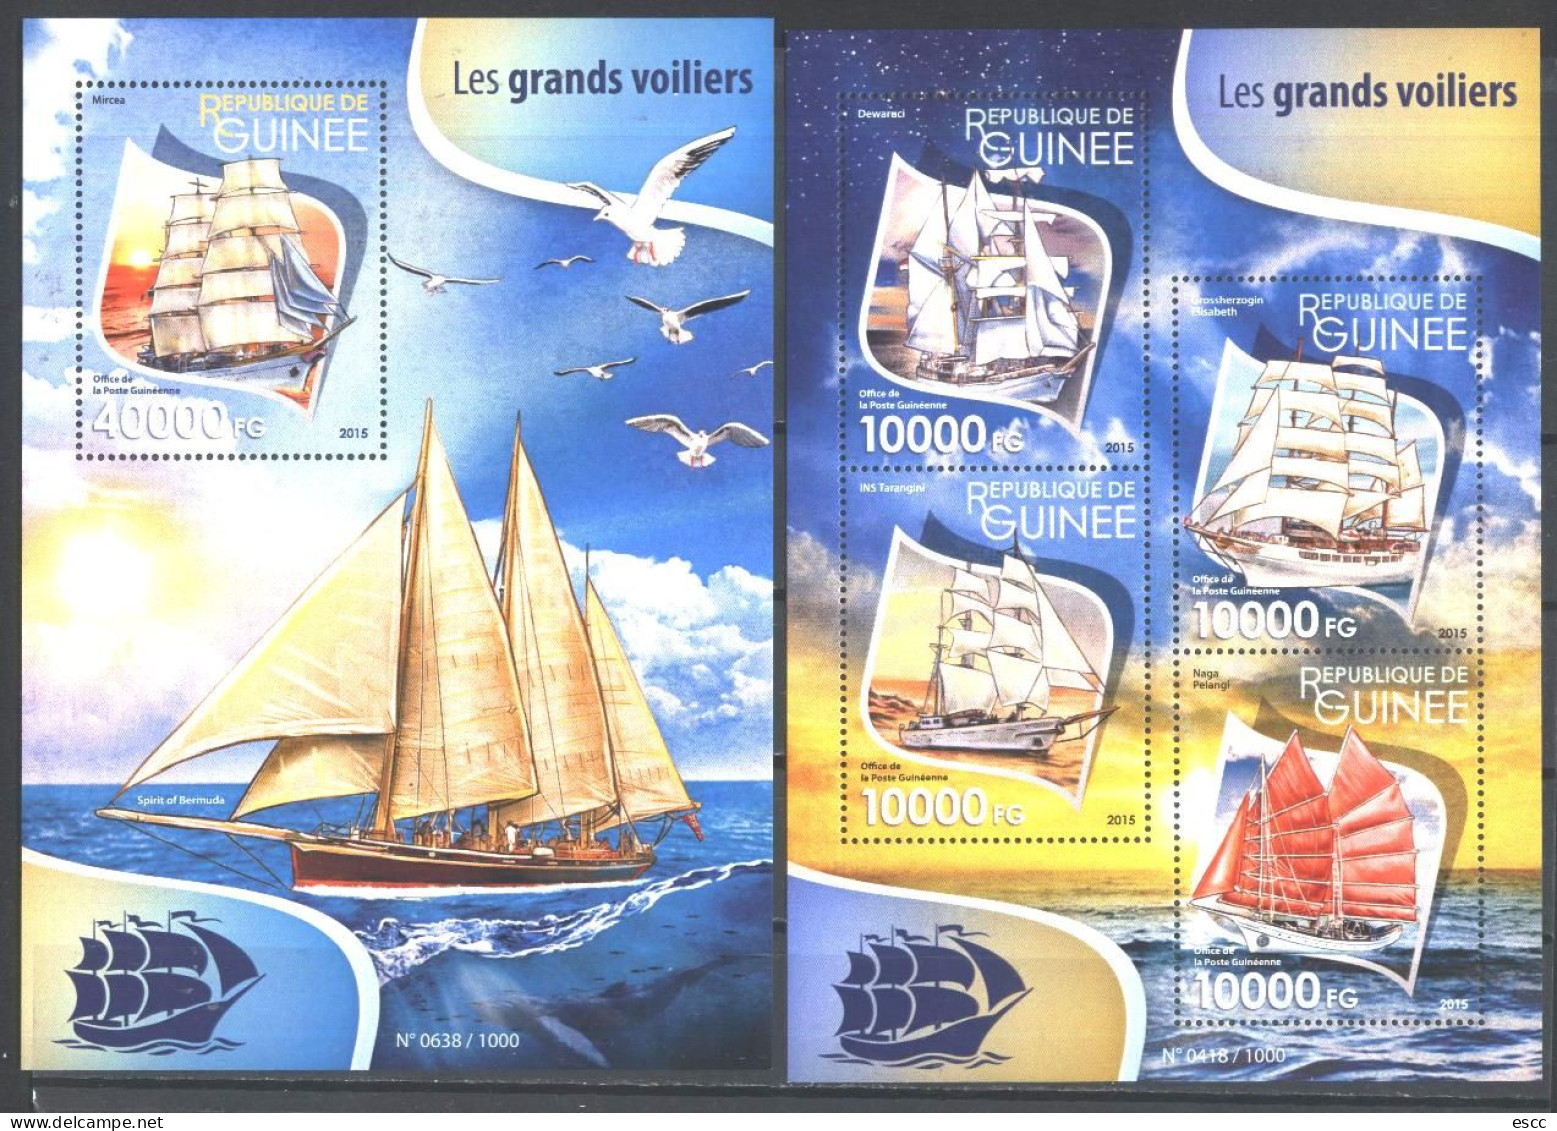 Mint Stamps In Miniature Sheet Abd S/S Ships  2015  From Guinea - Barcos